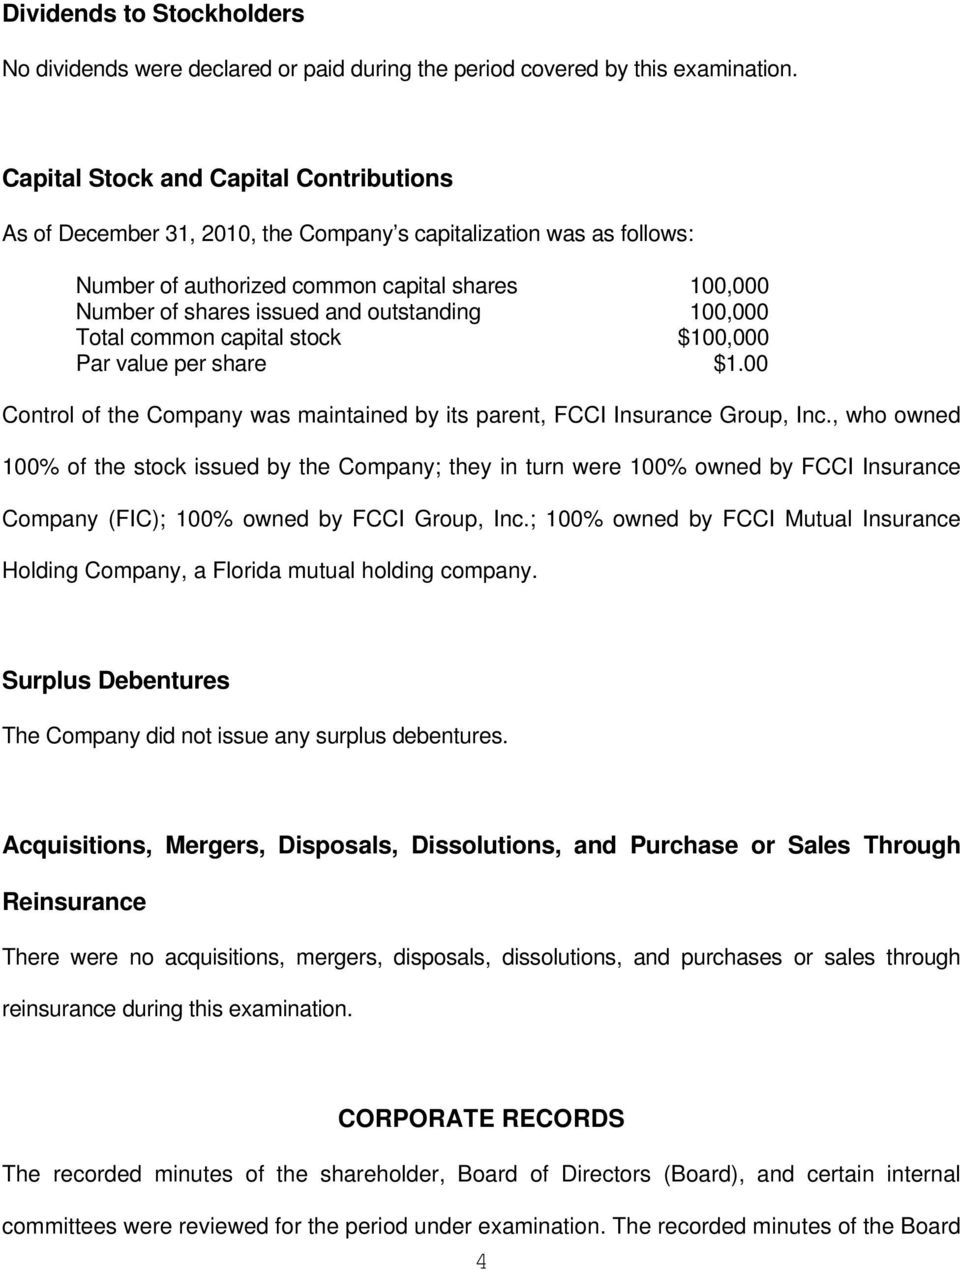 outstanding 100,000 Total common capital stock $100,000 Par value per share $1.00 Control of the Company was maintained by its parent, FCCI Insurance Group, Inc.